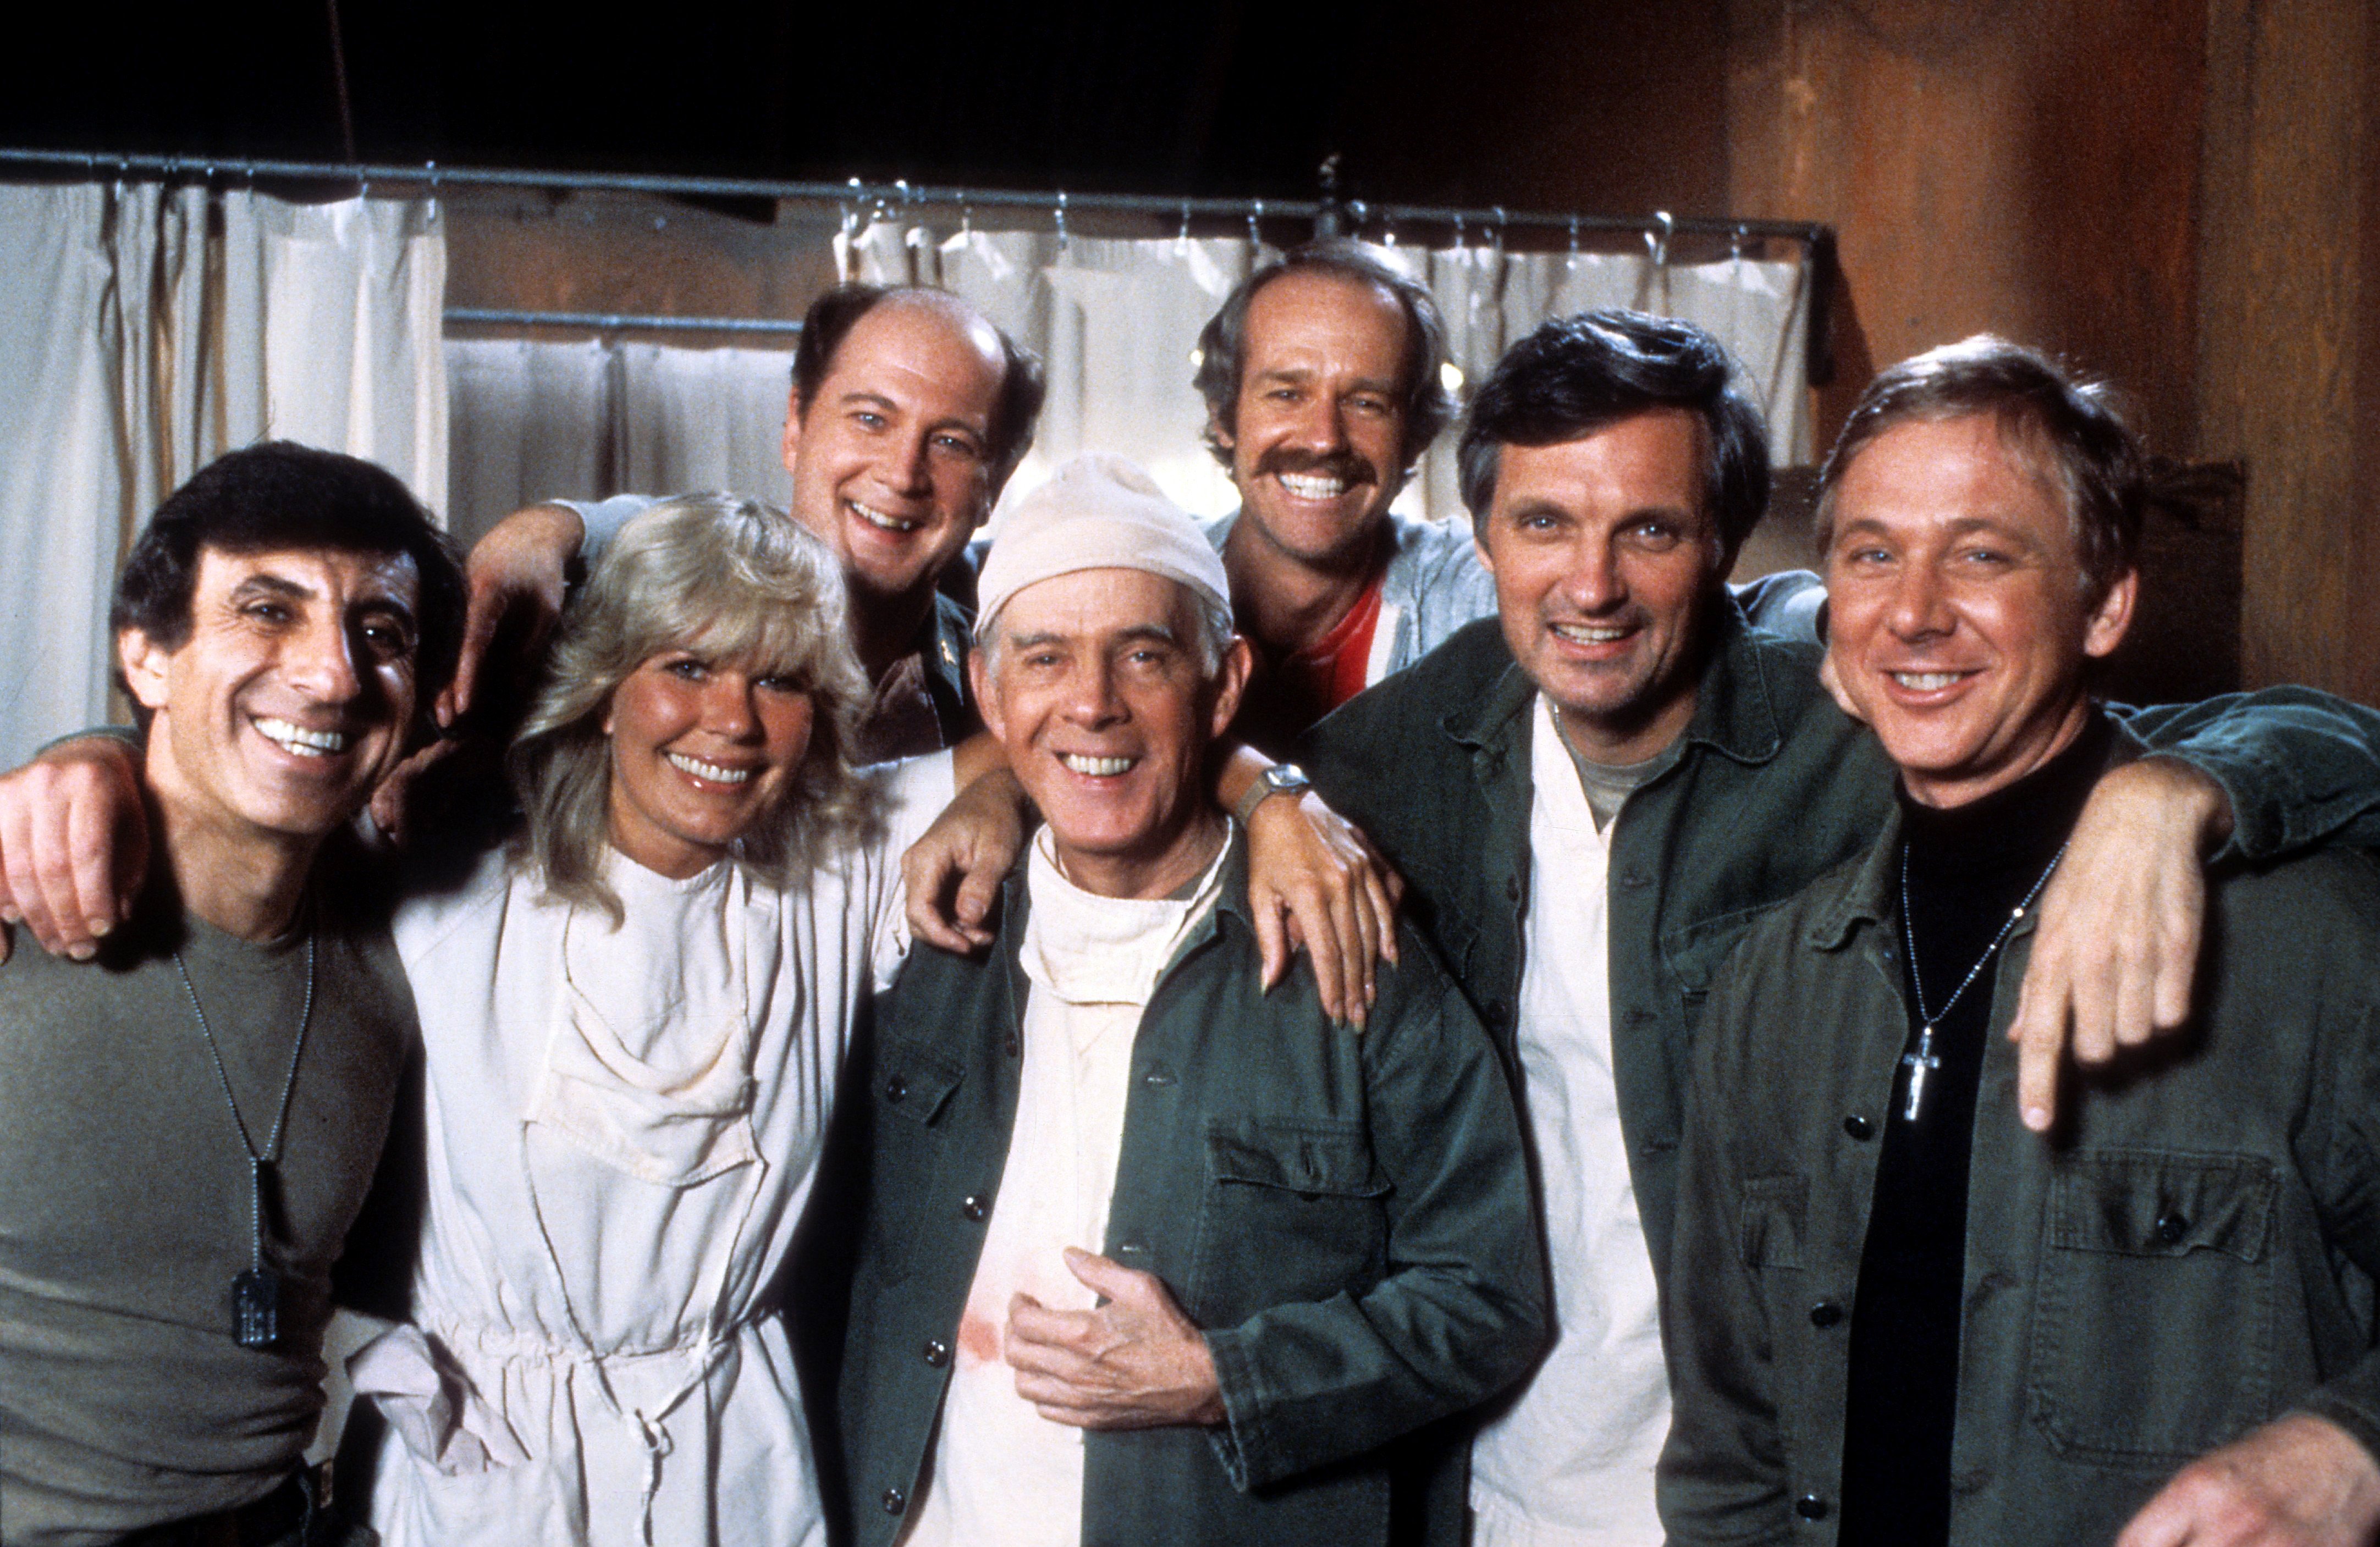 Jamie Farr, Loretta Swit, David Ogden Stiers, Harry Morgan, Mike Farrell, Alan Alda, and William Christopher in publicity portrait for the television series 'M*A*S*H', Circa 1978